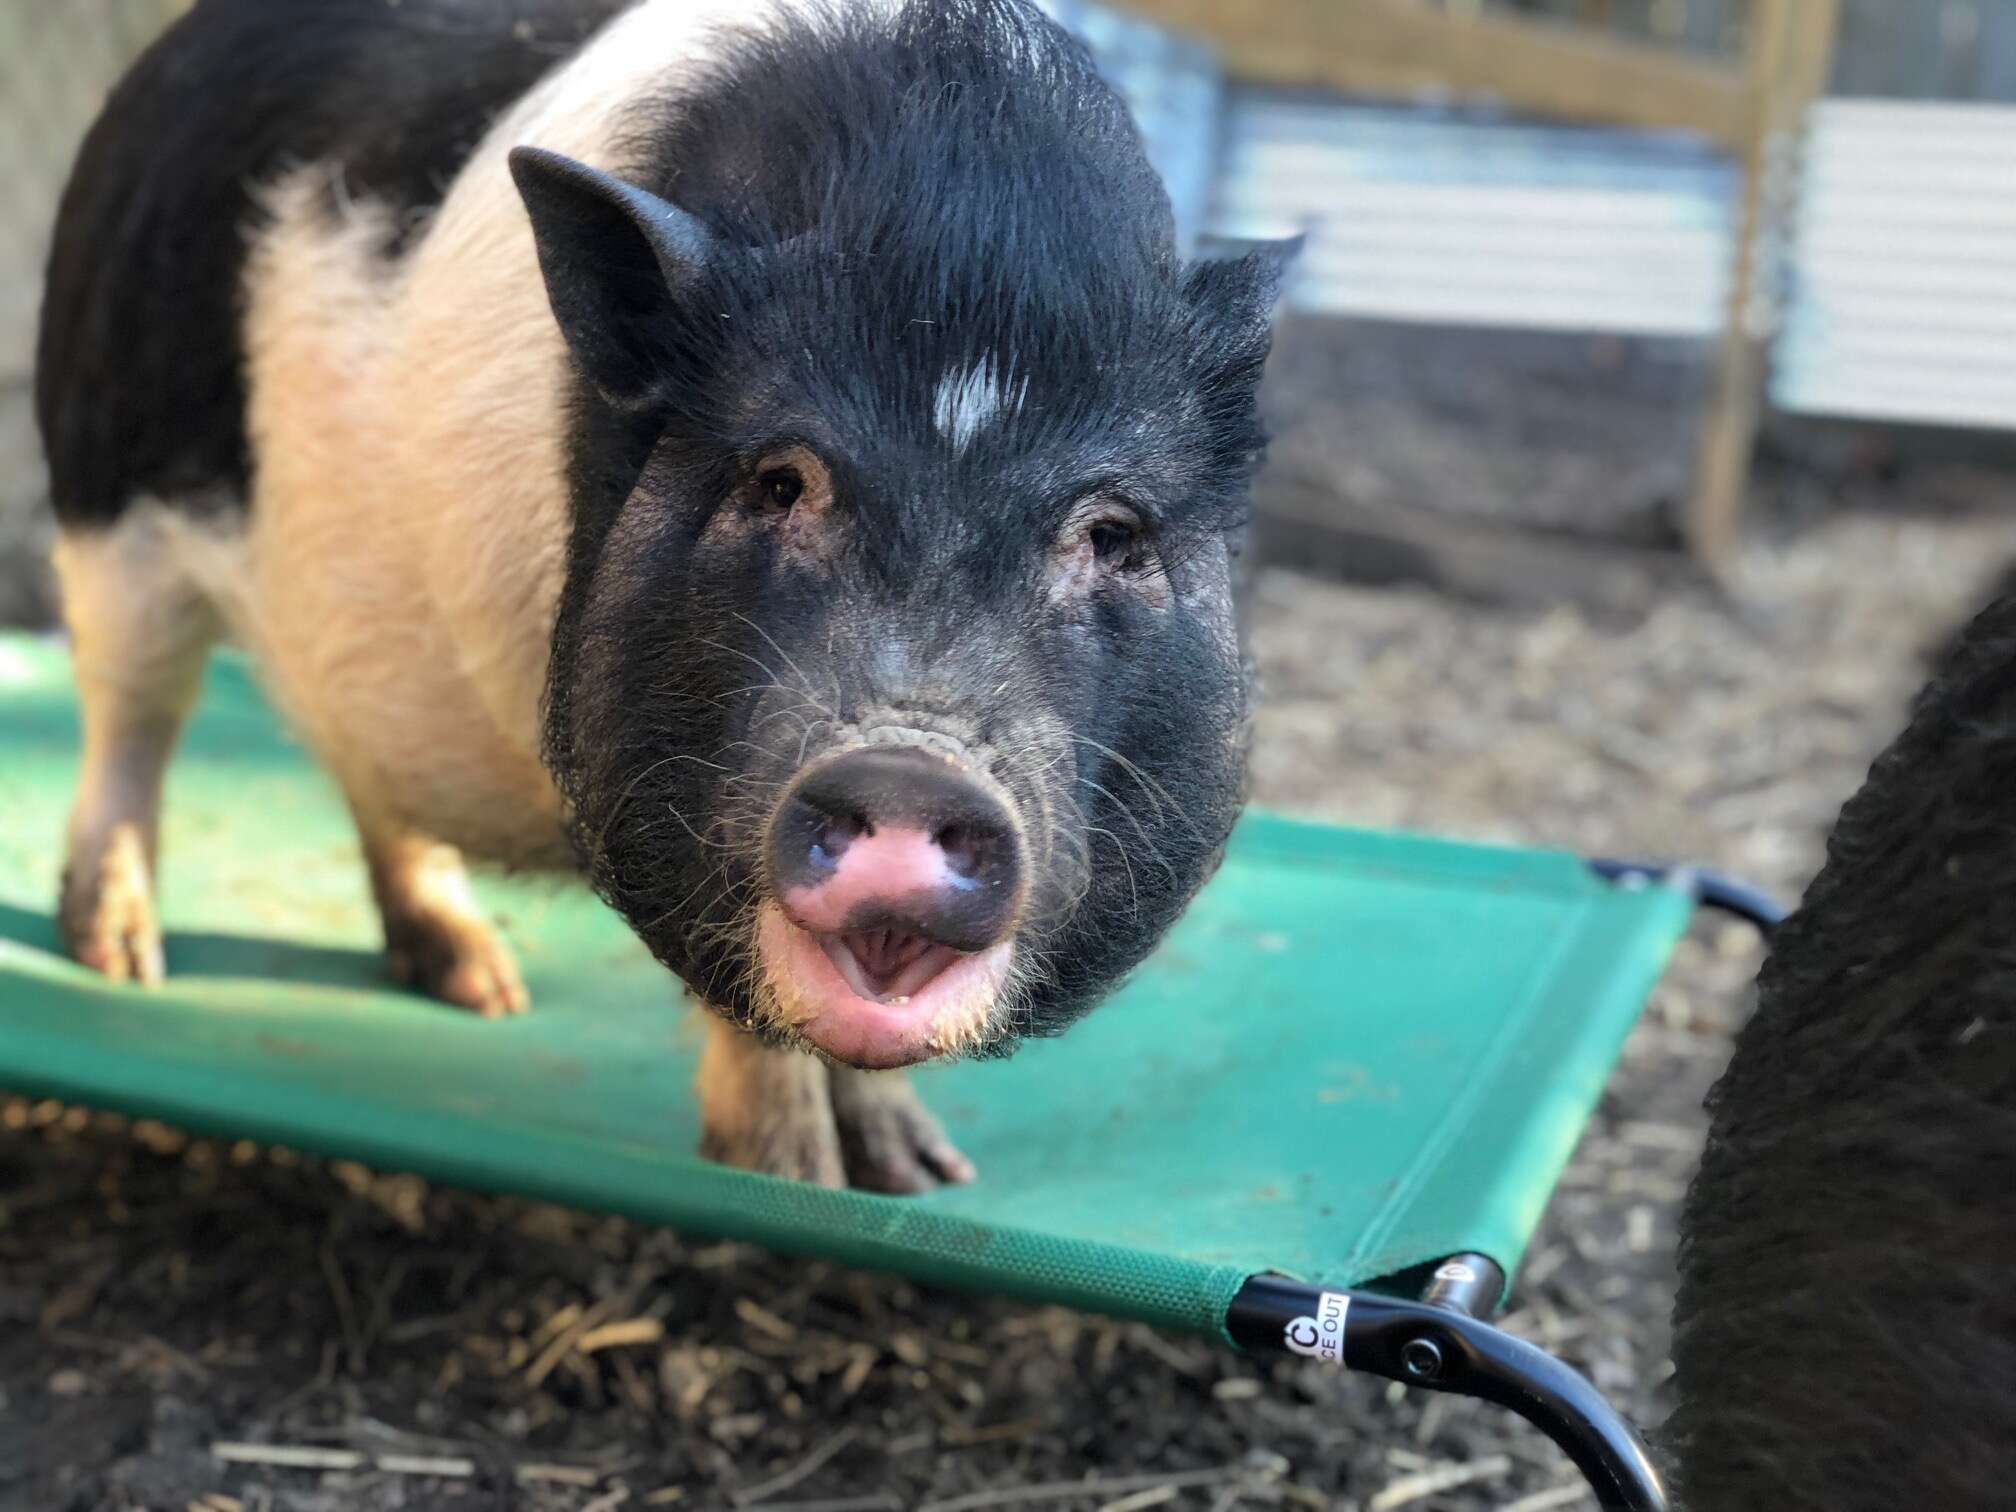 rescue pigs abandoned because they got too big